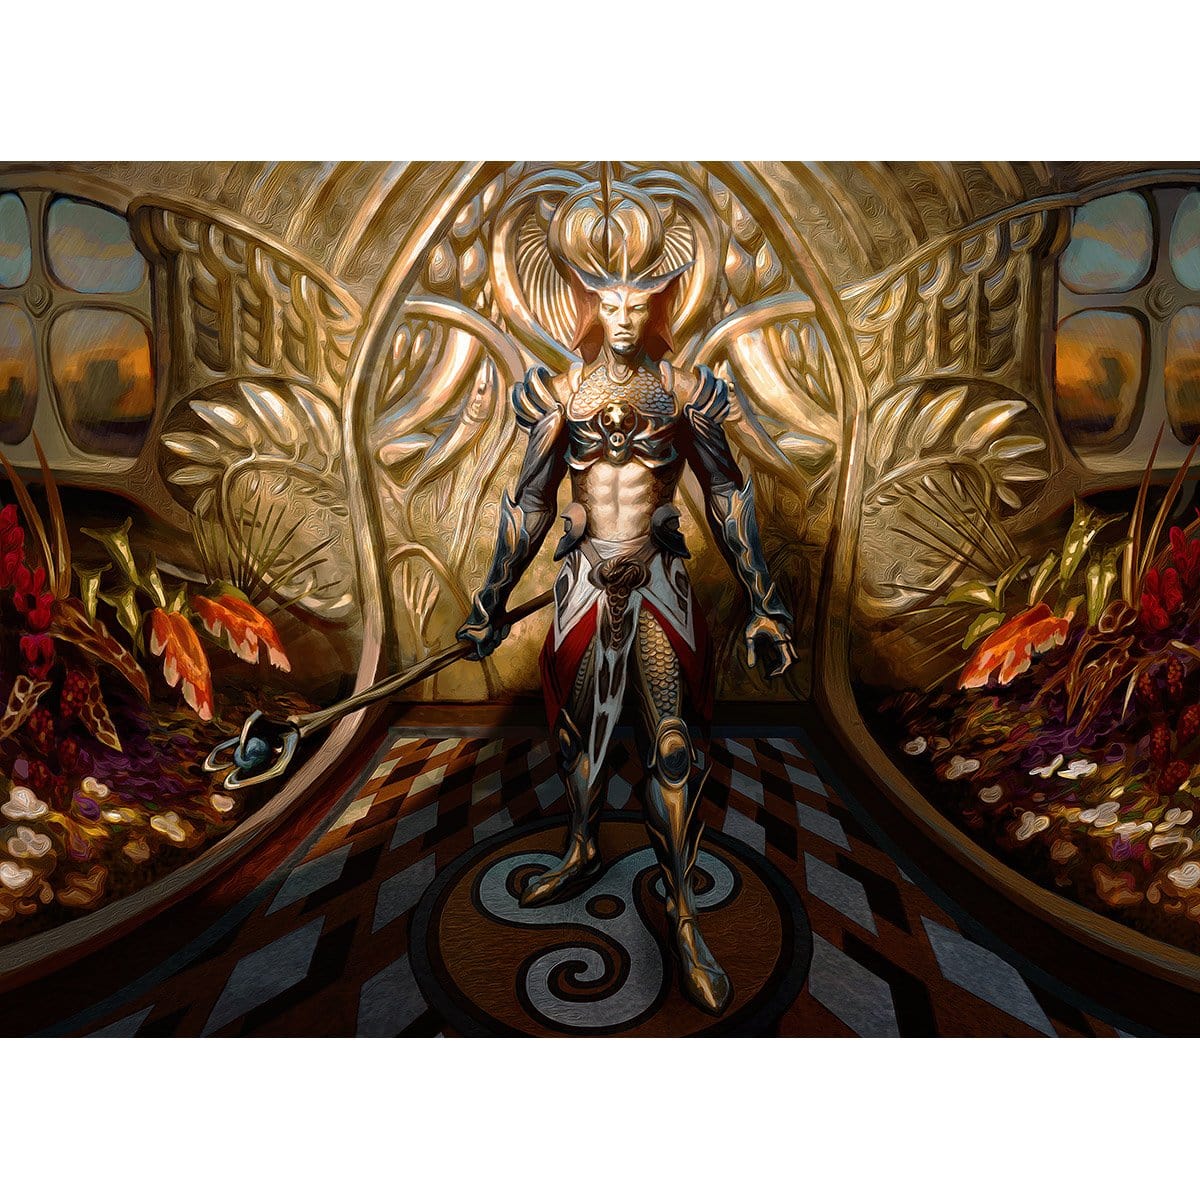 Vorel of the Hull Clade Print - Print - Original Magic Art - Accessories for Magic the Gathering and other card games